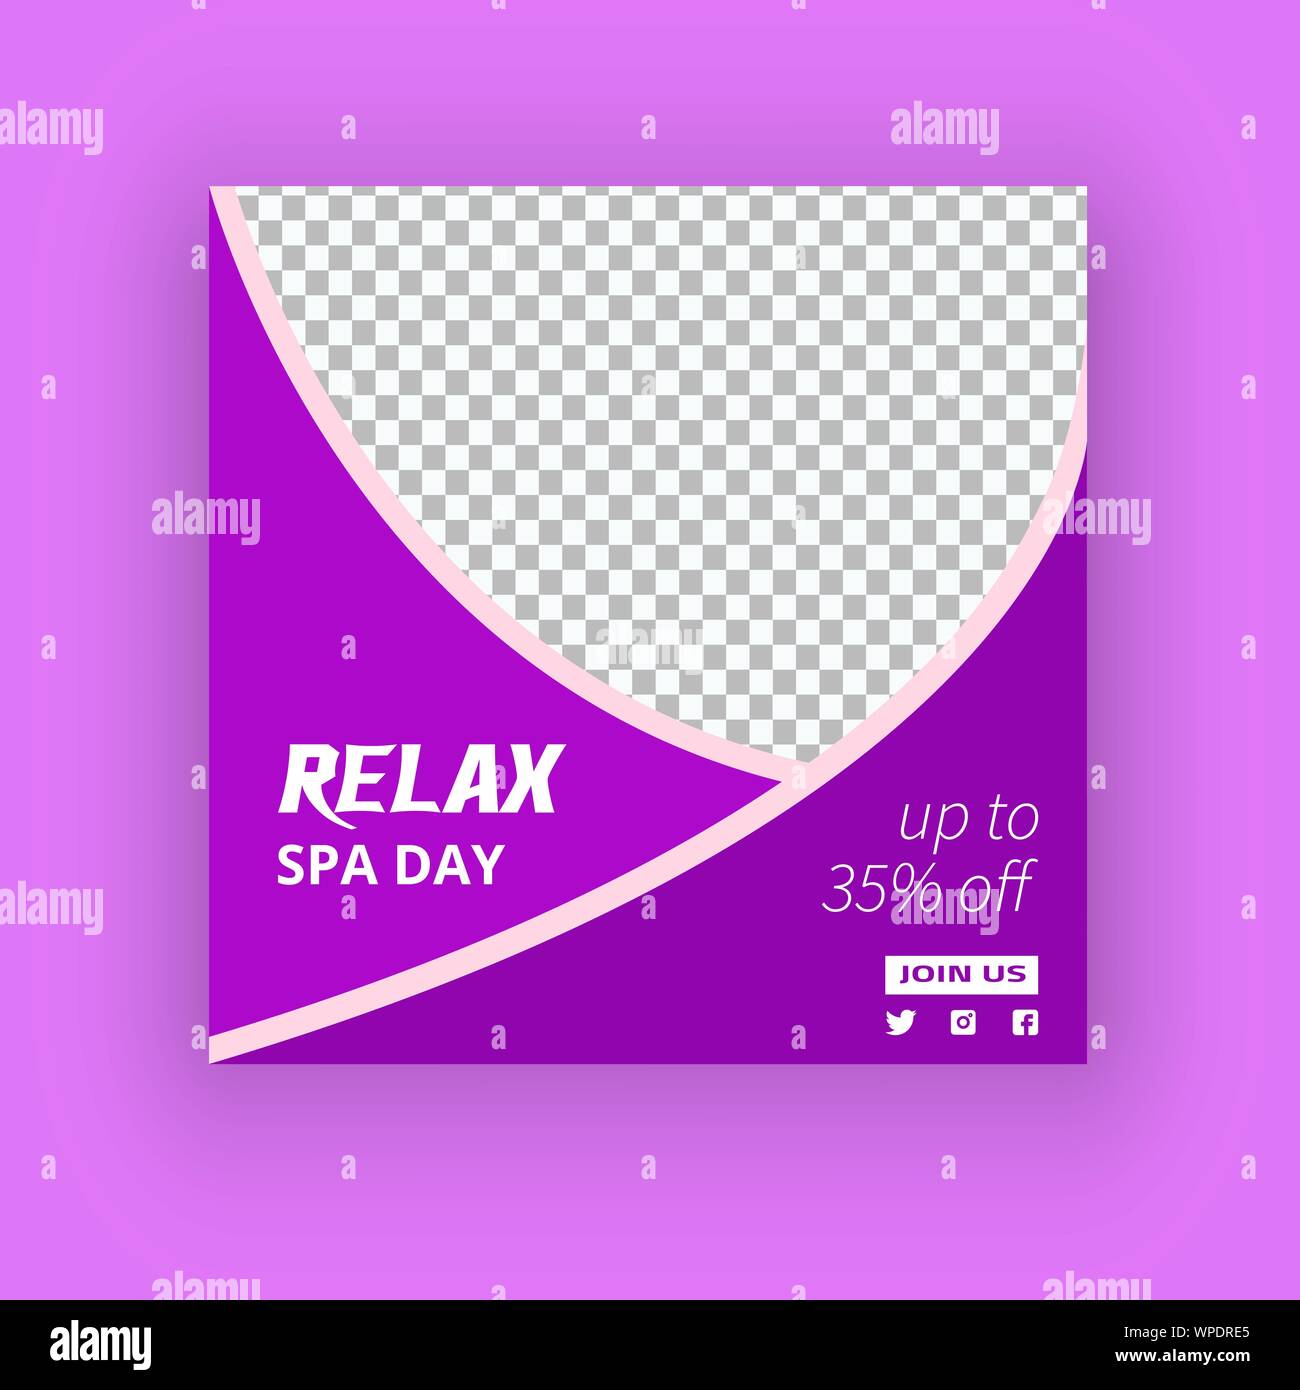 Beauty and Spa social media post template Stock Vector